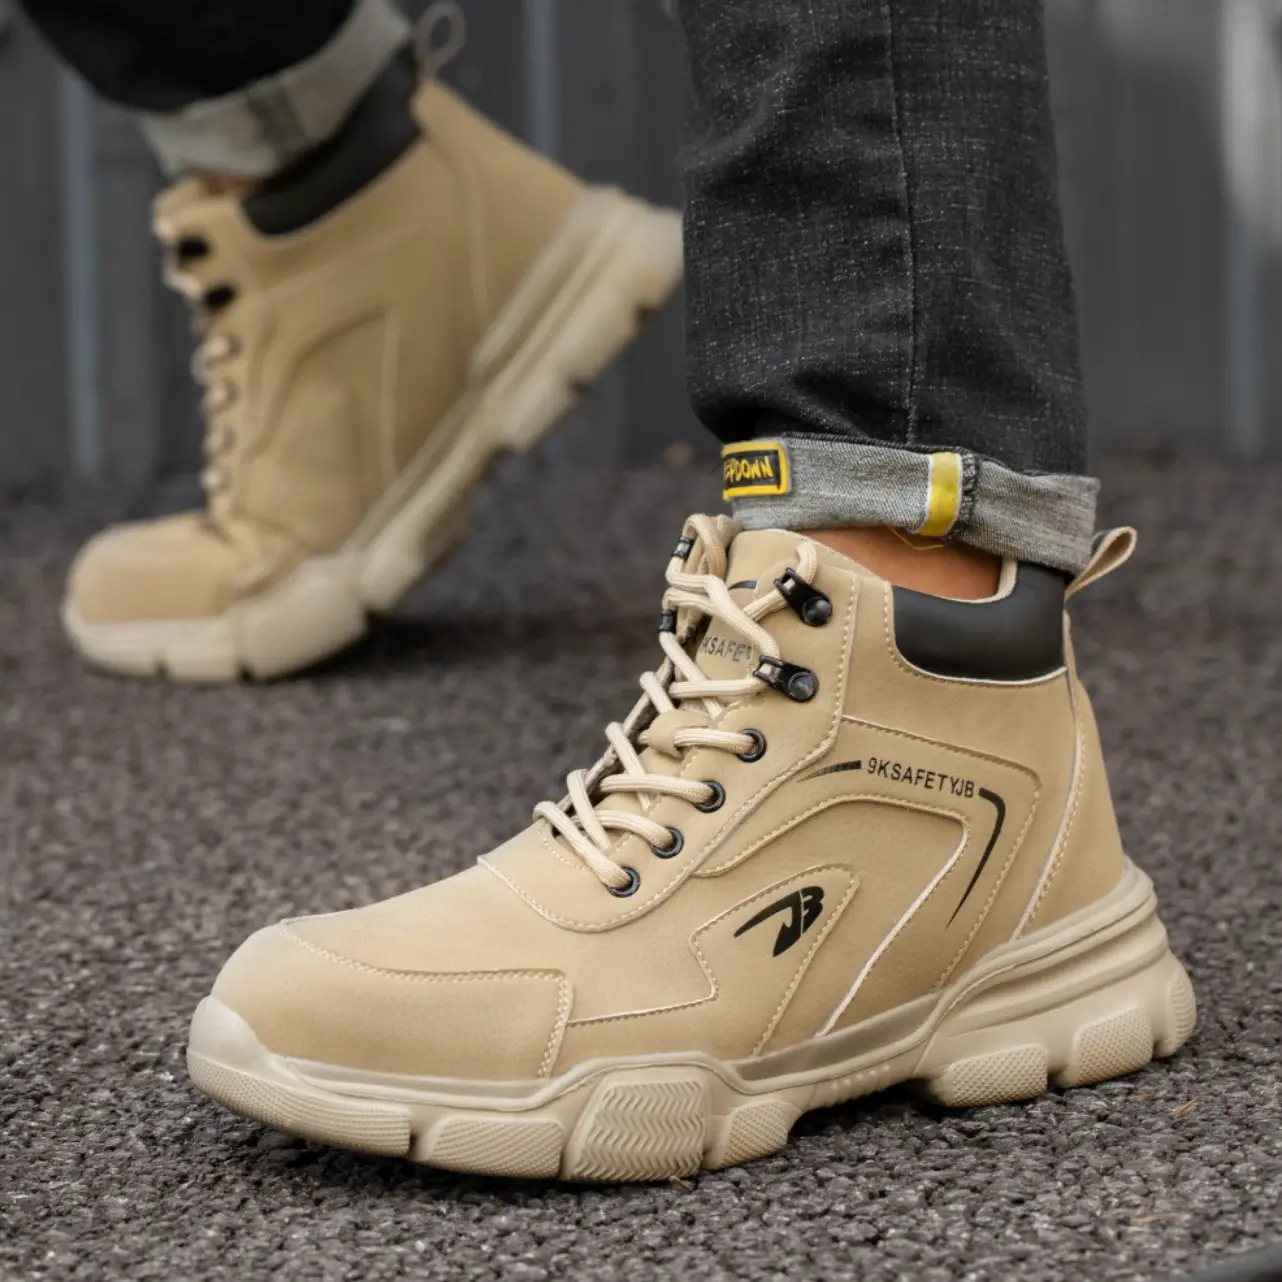 Free shipping high cut steel toe work Shoes Smash and Puncture Resistant Comfortable Safety Boots